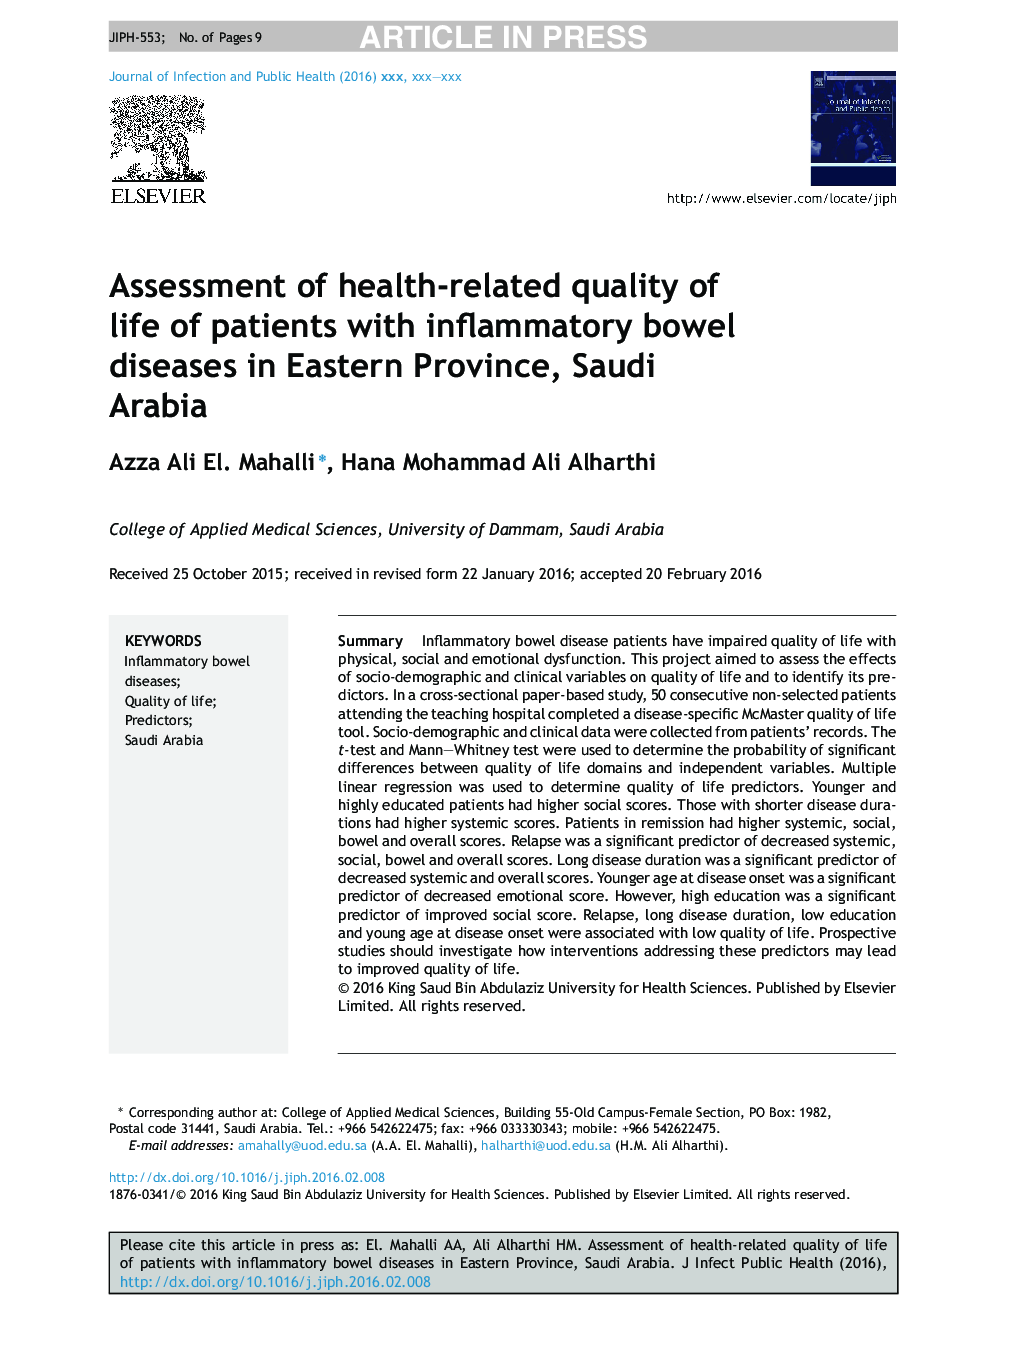 Assessment of health-related quality of life of patients with inflammatory bowel diseases in Eastern Province, Saudi Arabia